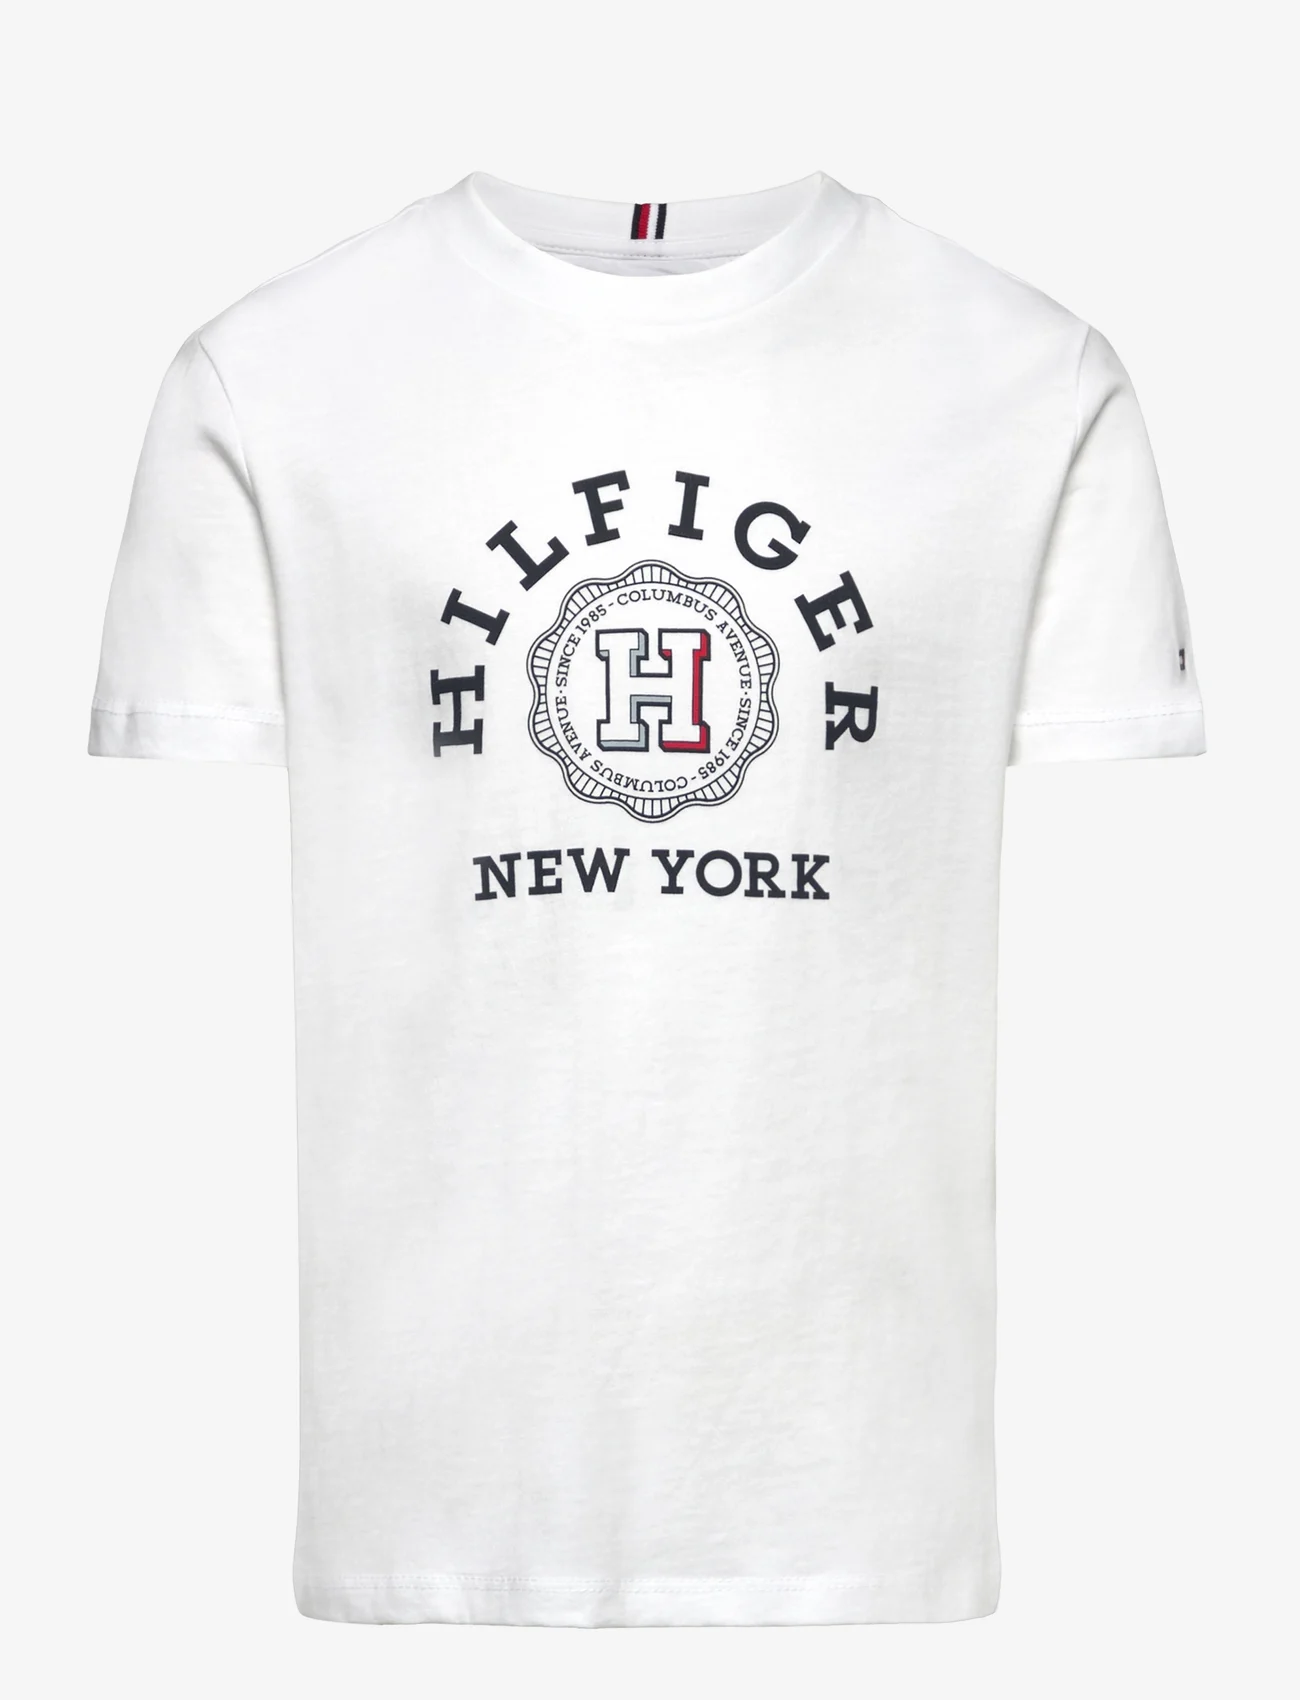 Tommy Hilfiger - MONOTYPE ARCH TEE S/S - kortærmede t-shirts - white - 0